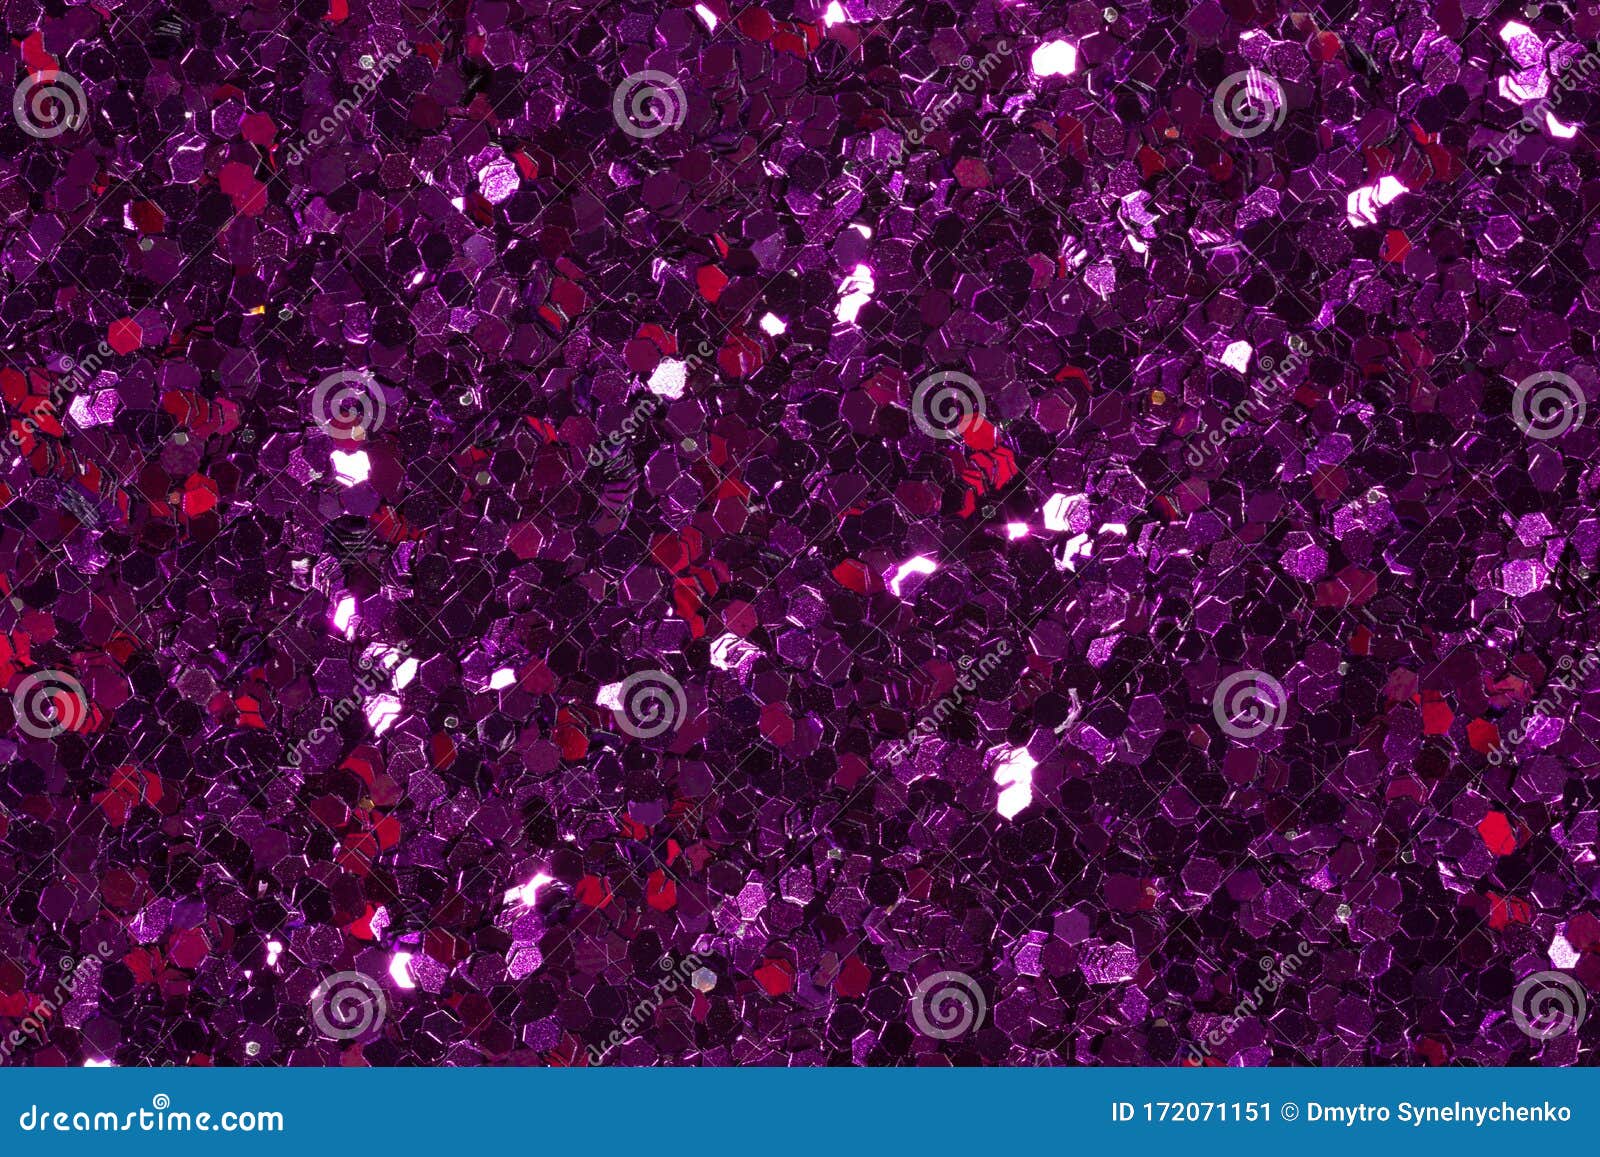 dark violet confetti on shiny background, perfect texture for creative  work.